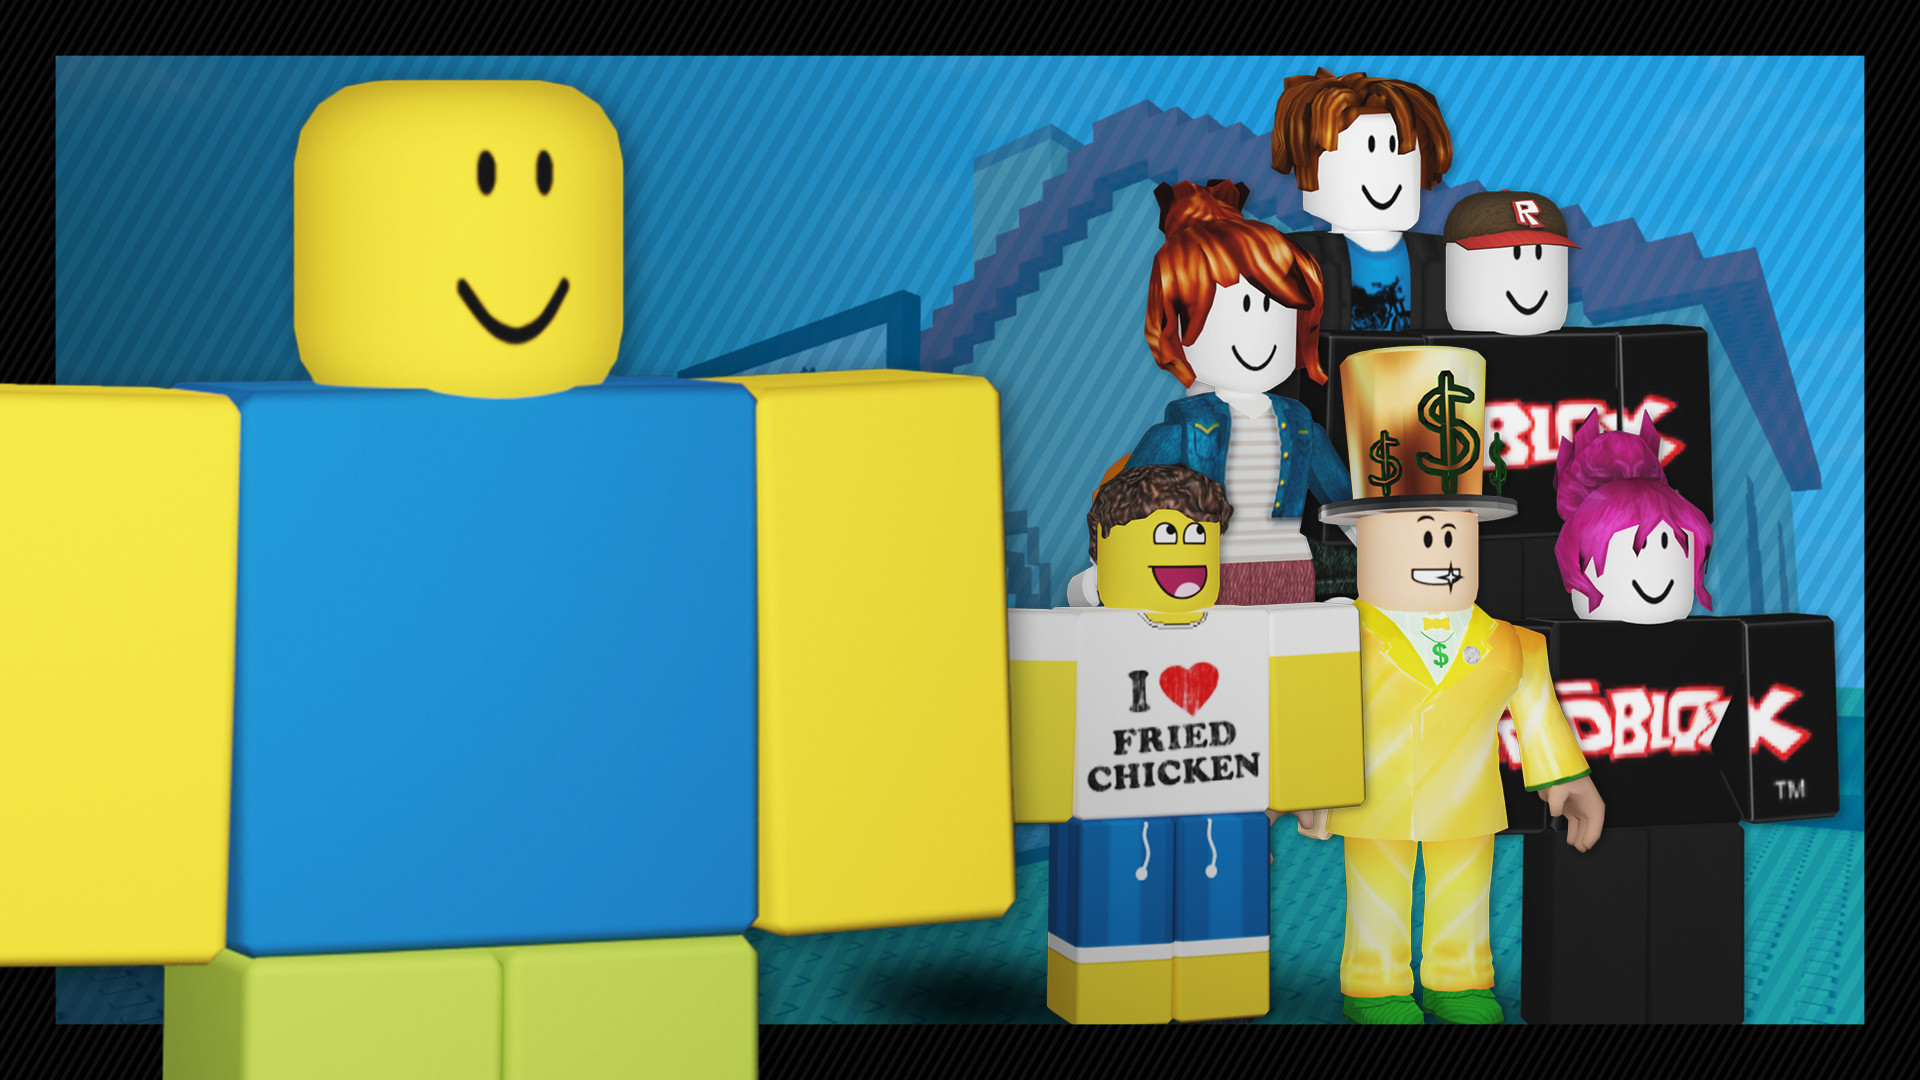 Download Check out the new noob avatar on Roblox! Wallpaper